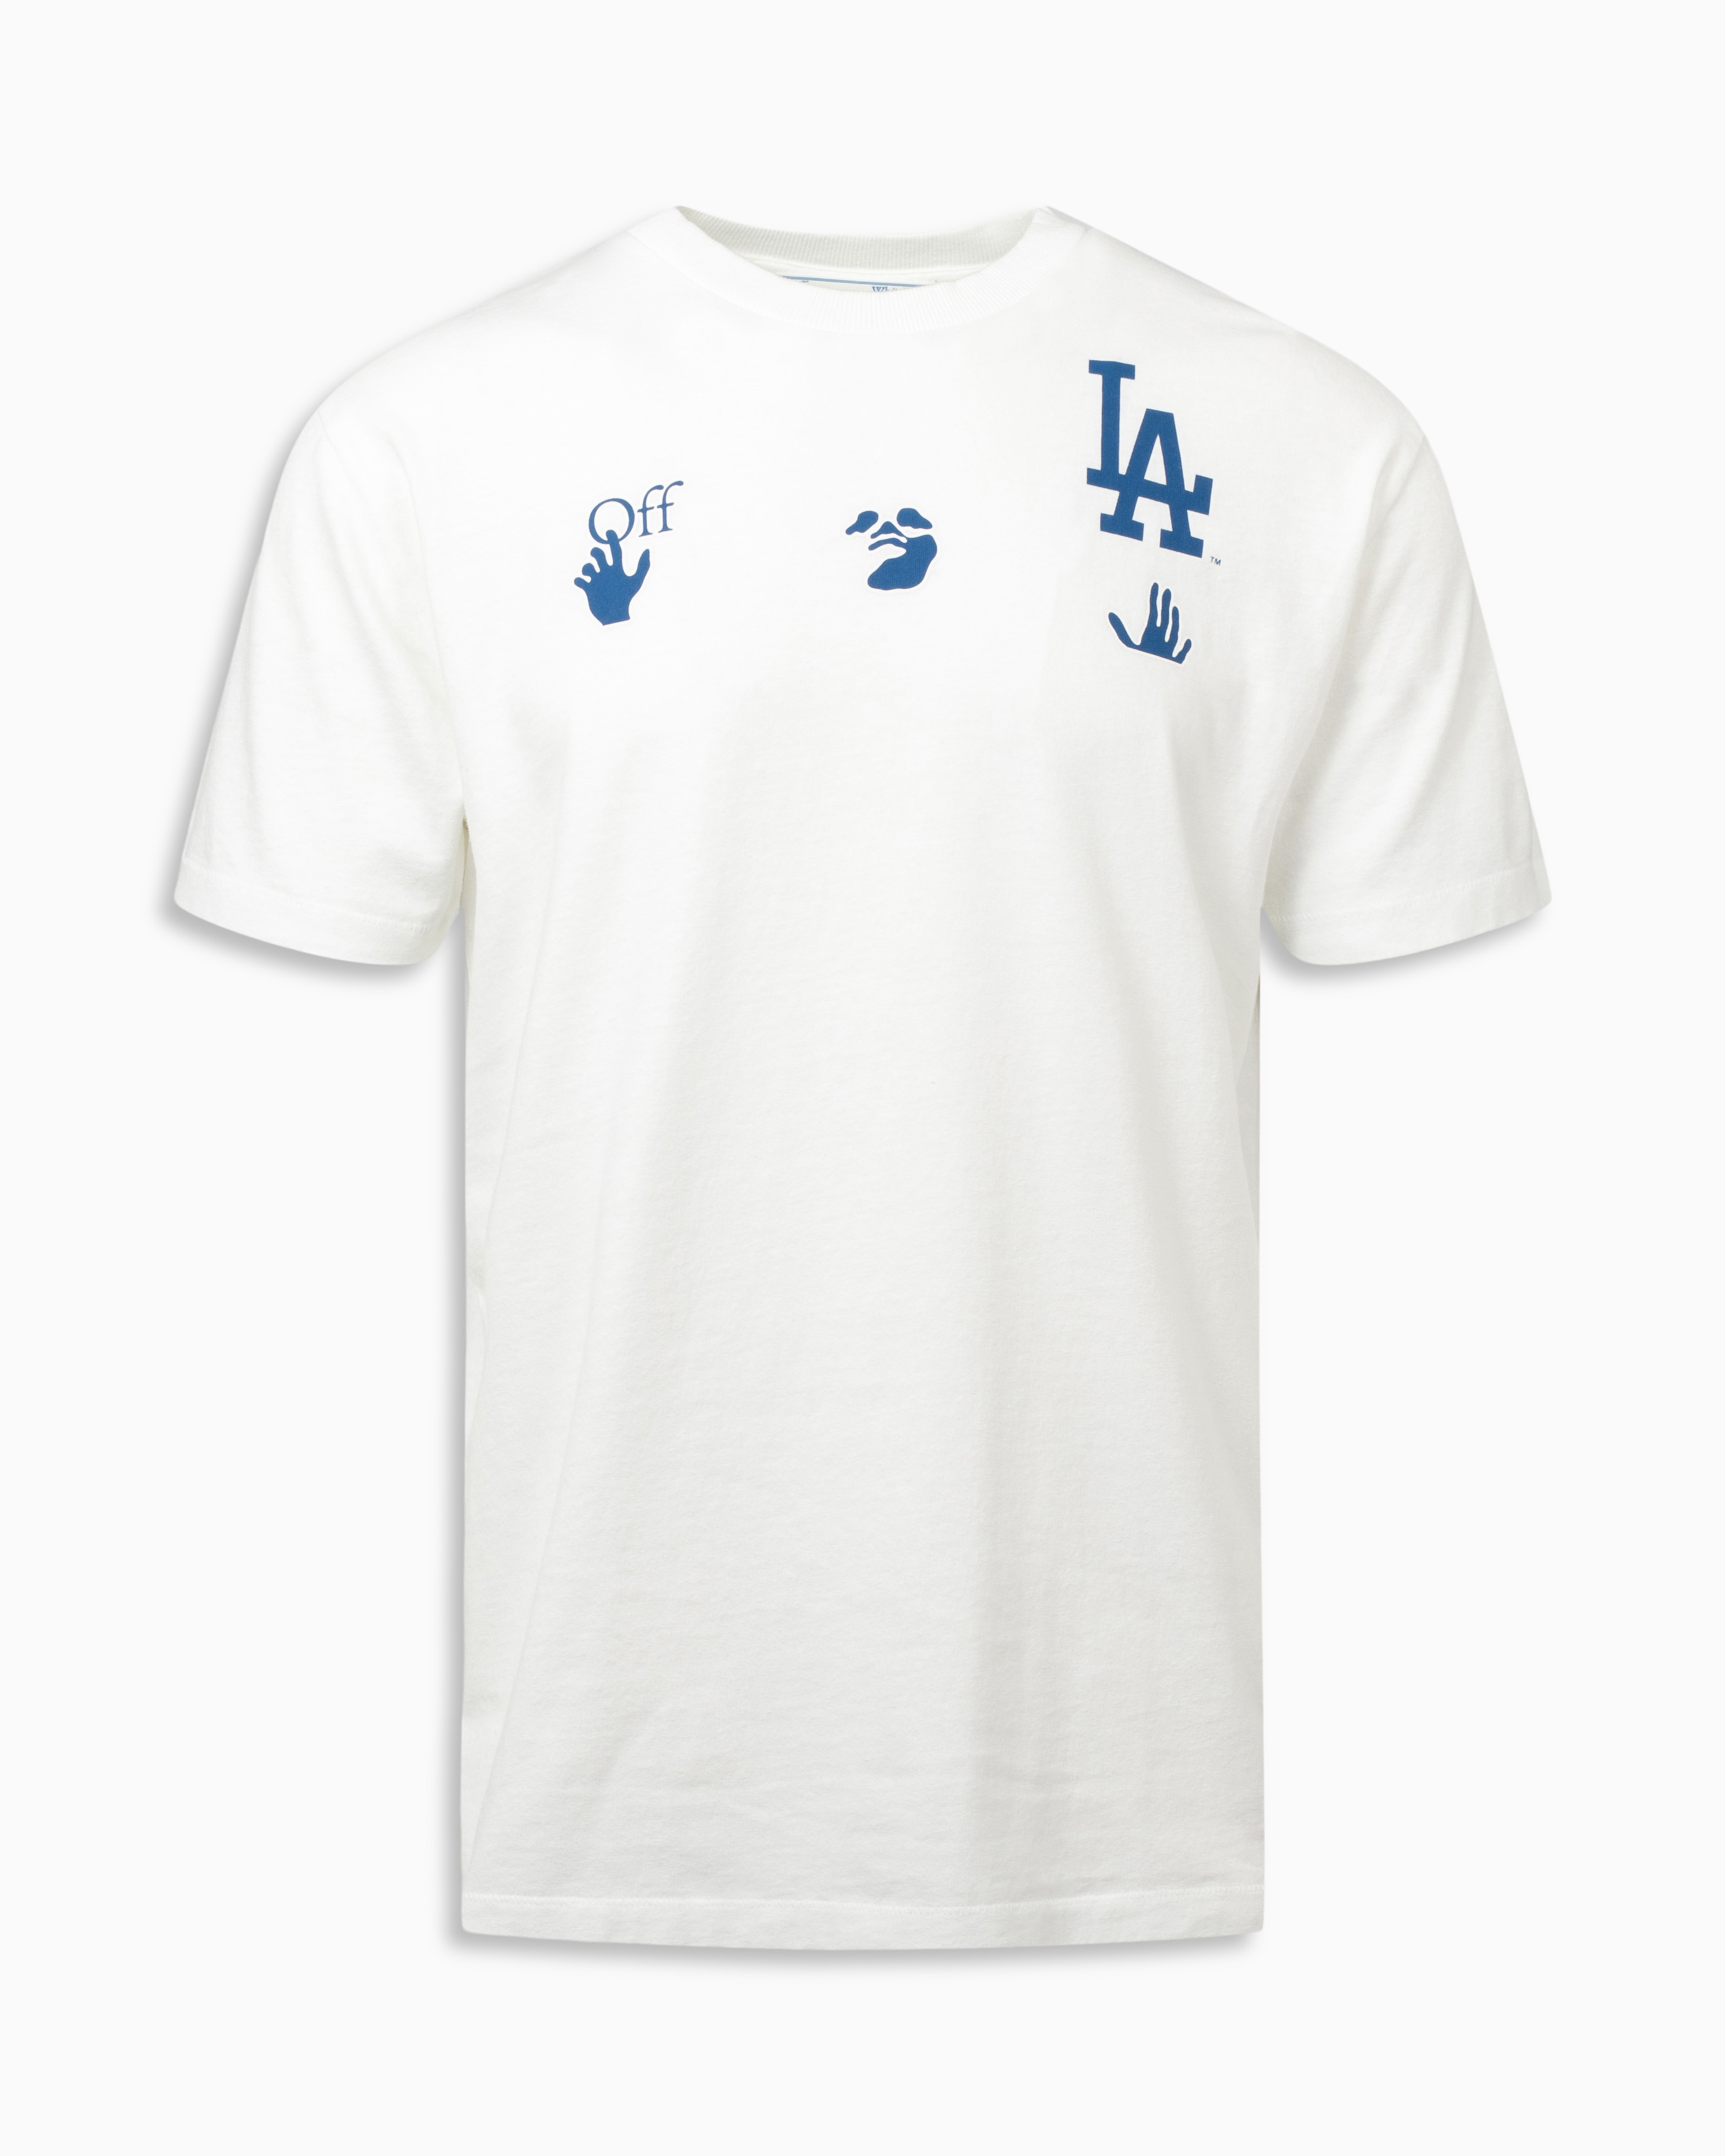 Dodgers Jersey & More Part Of Collaboration Between Off-White, MLB & New Era